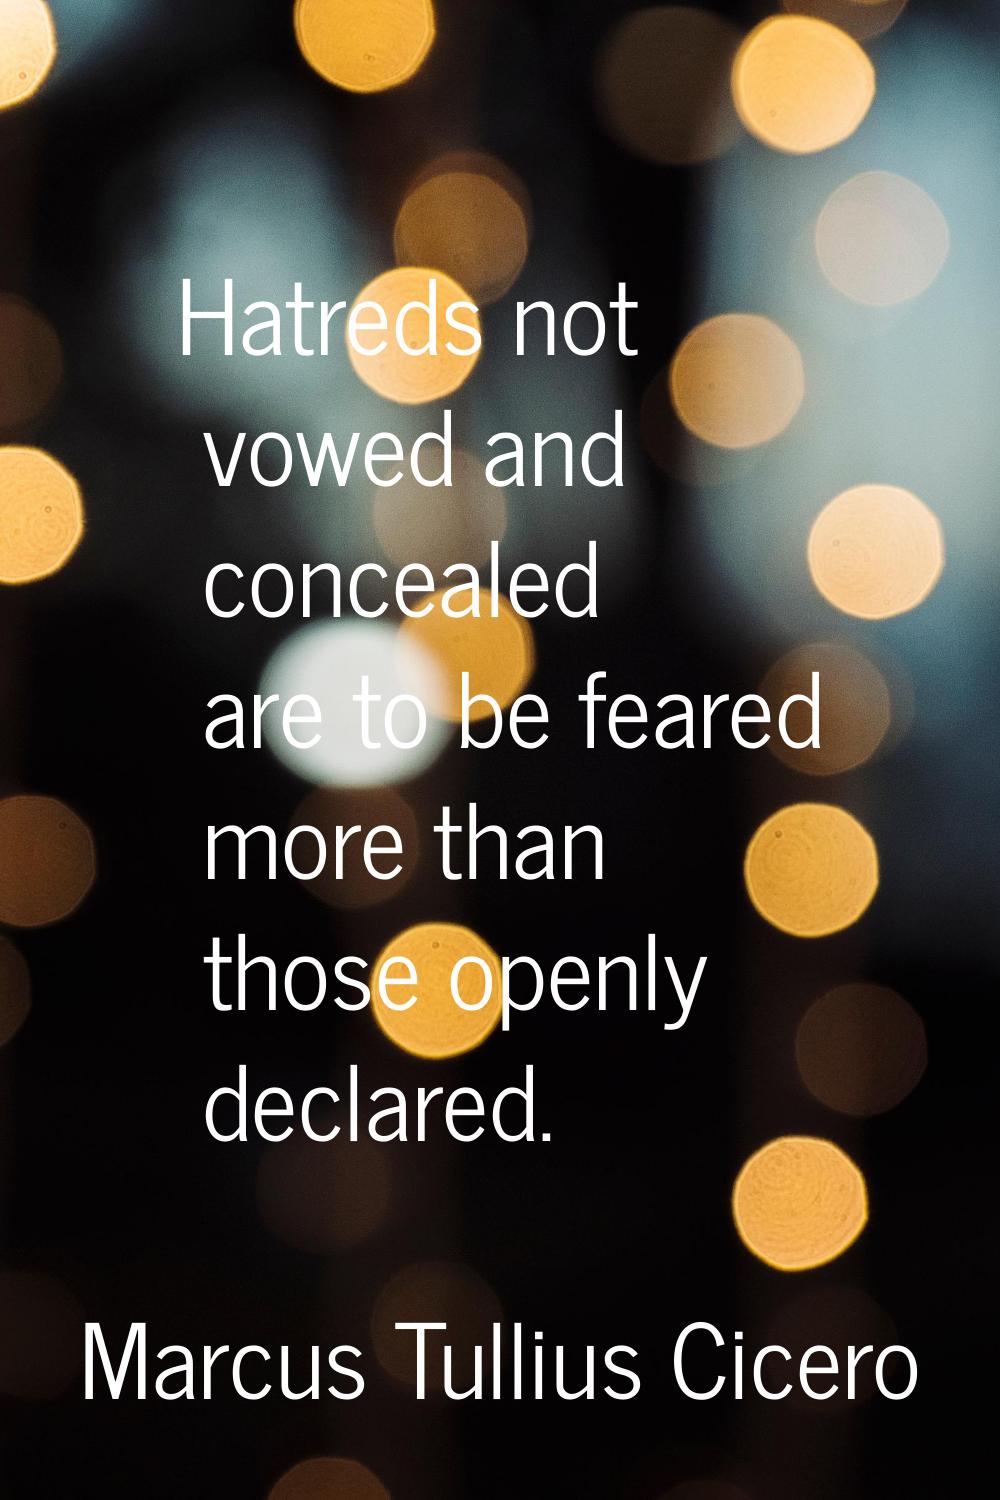 Hatreds not vowed and concealed are to be feared more than those openly declared.